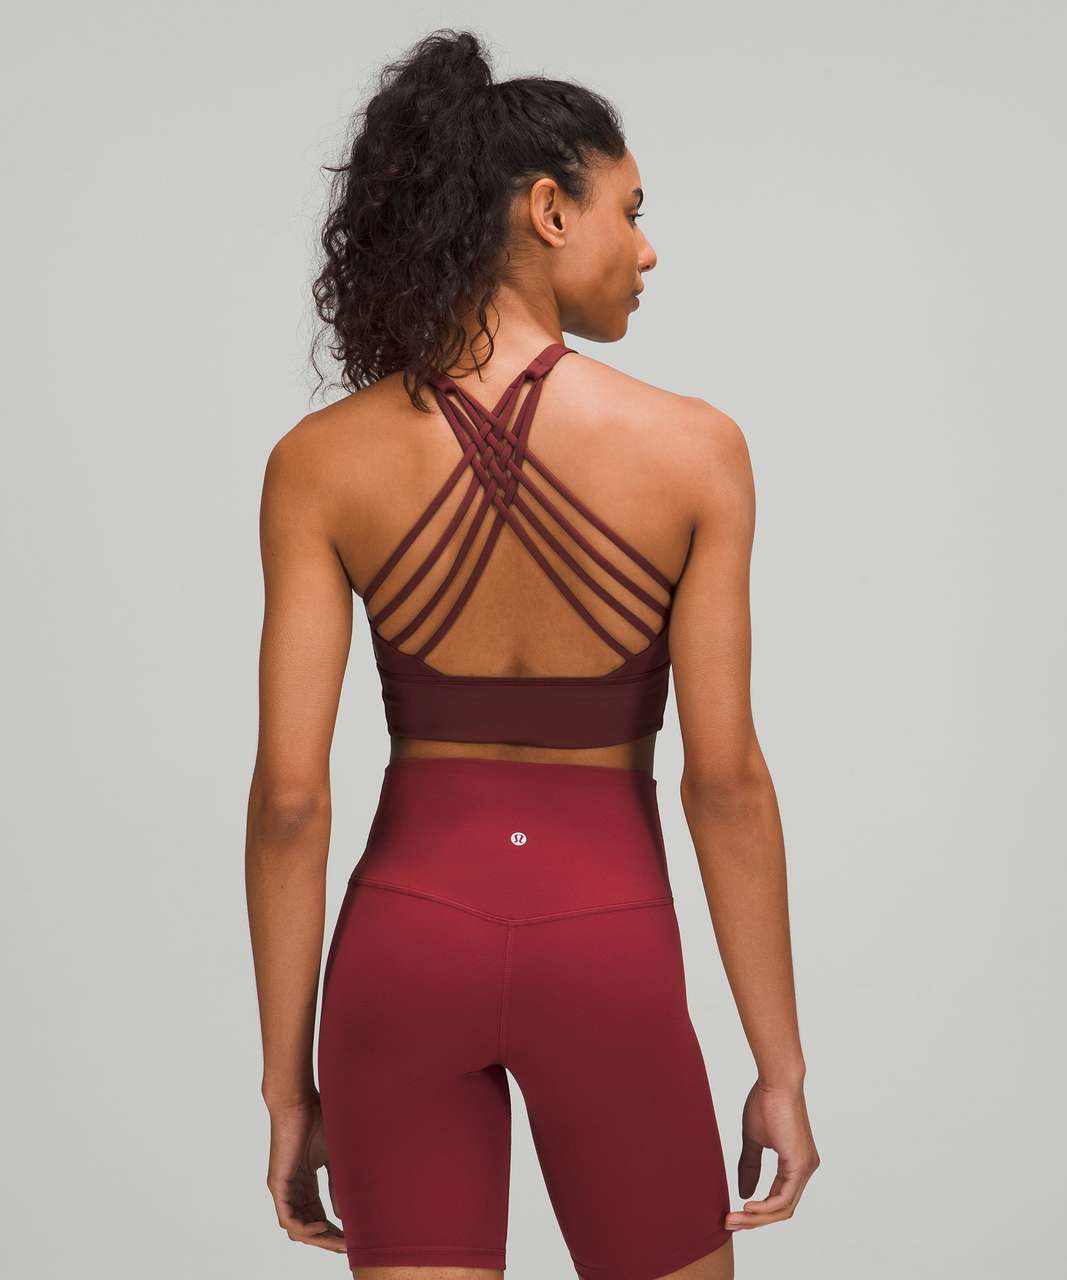 Lululemon Free to Be High-Neck Longline Bra - Wild *Light Support, A/B Cup - Red Merlot